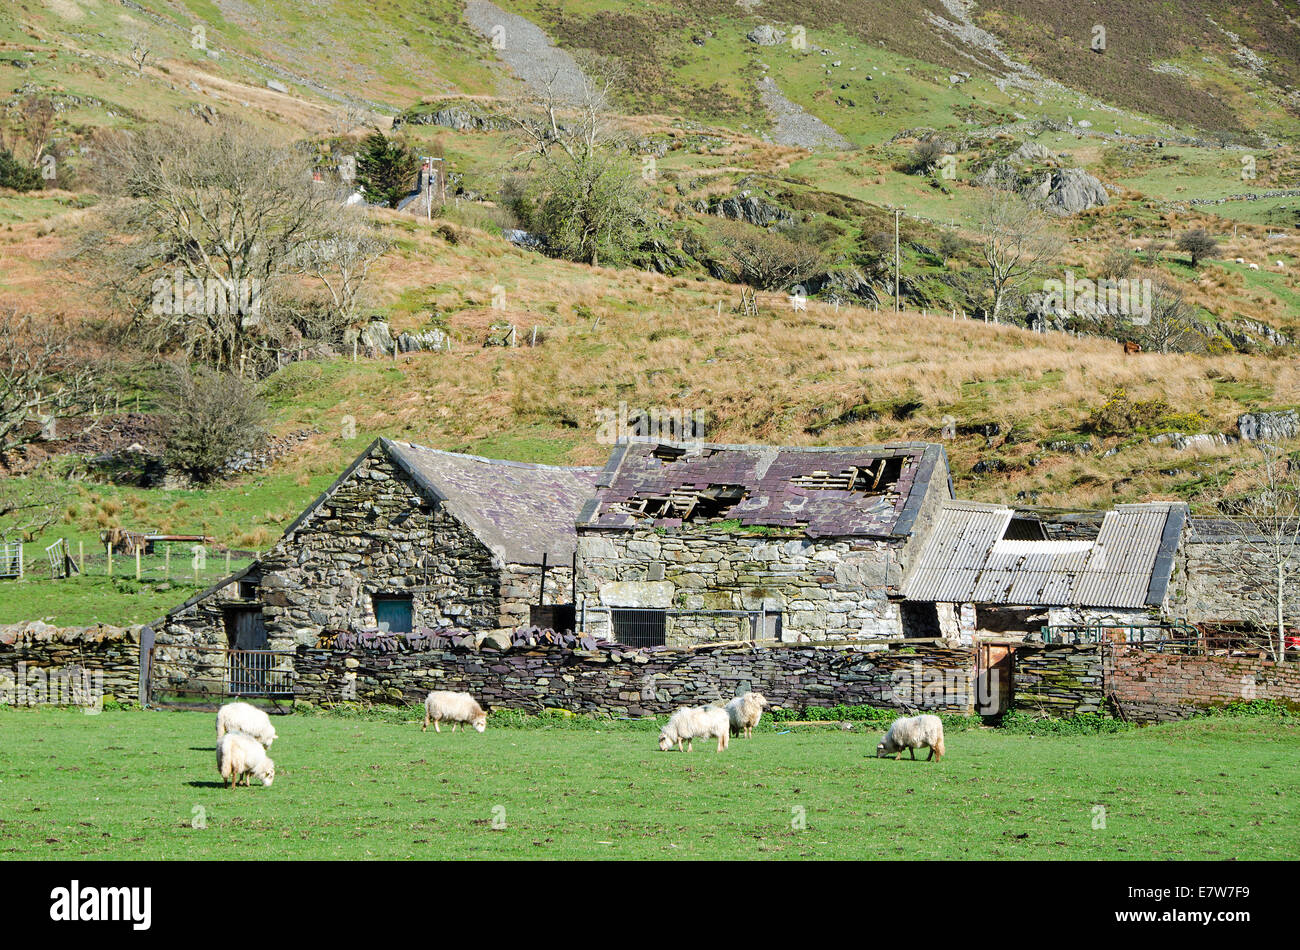 Sheep and delapidated farm buildings, Snowdonia National Park, Wales. Stock Photo